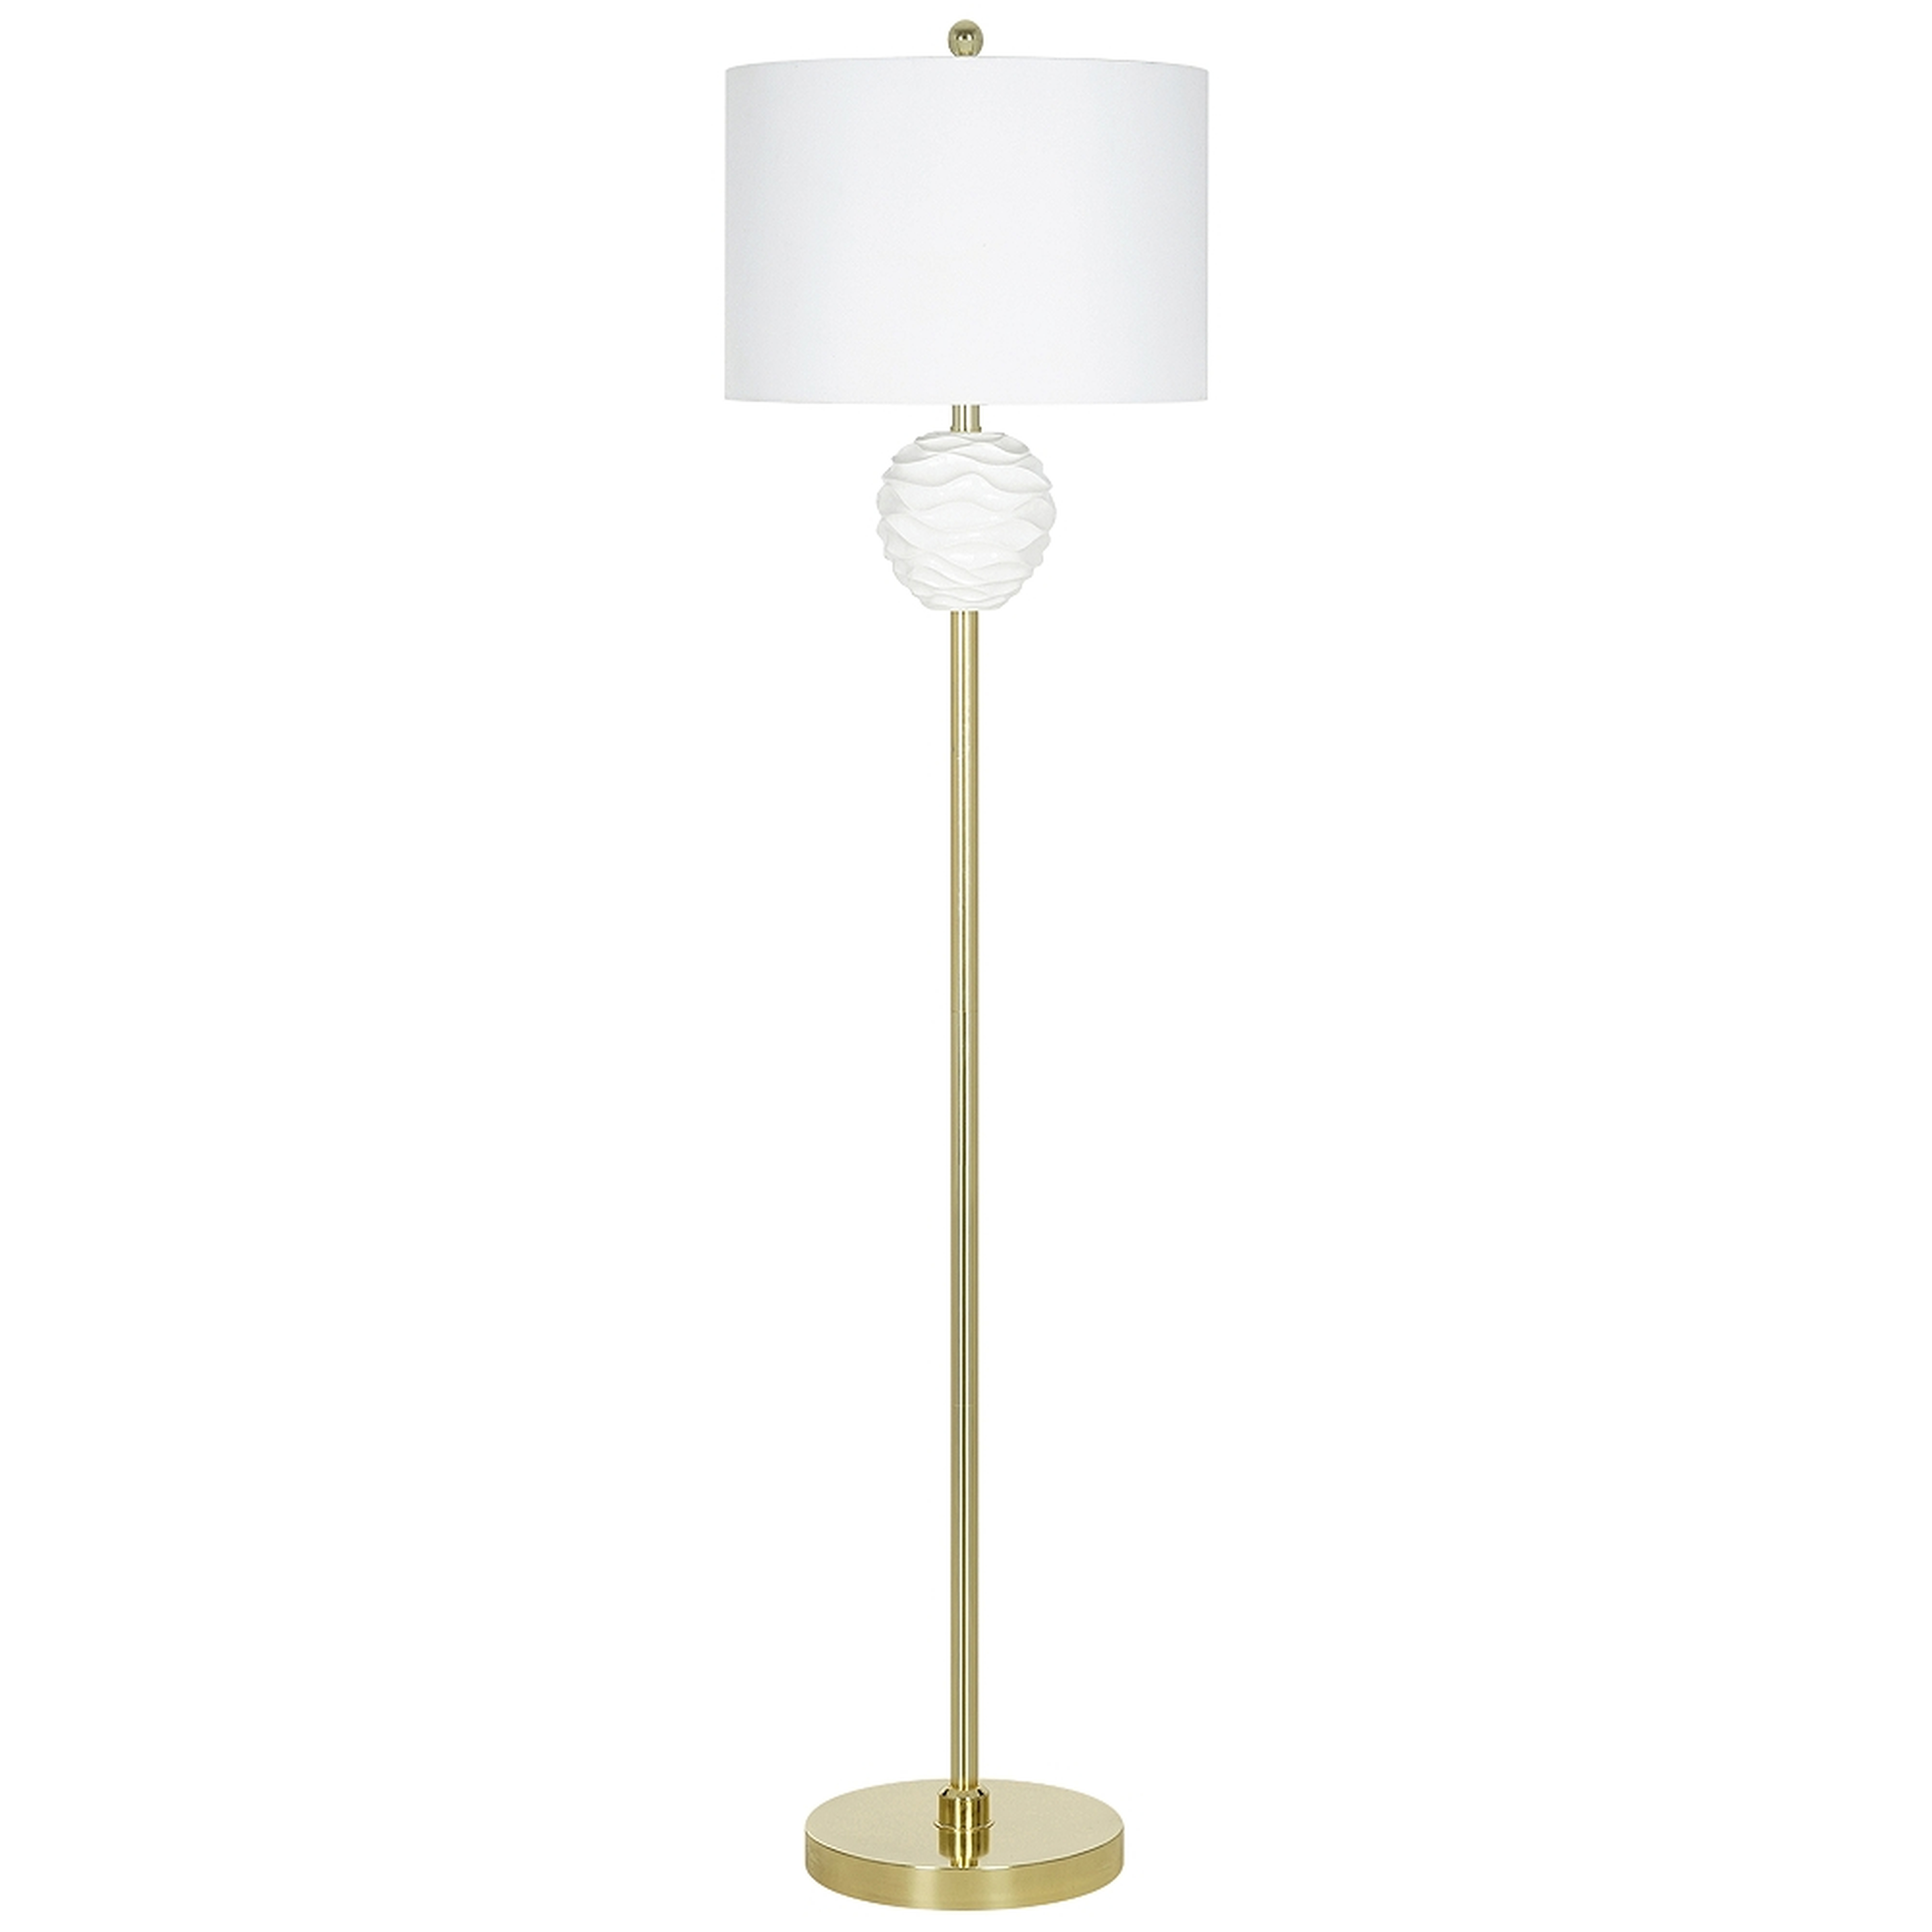 White Ruffle Textured and Brass Metal LED Floor Lamp - Style # 82H99 - Lamps Plus